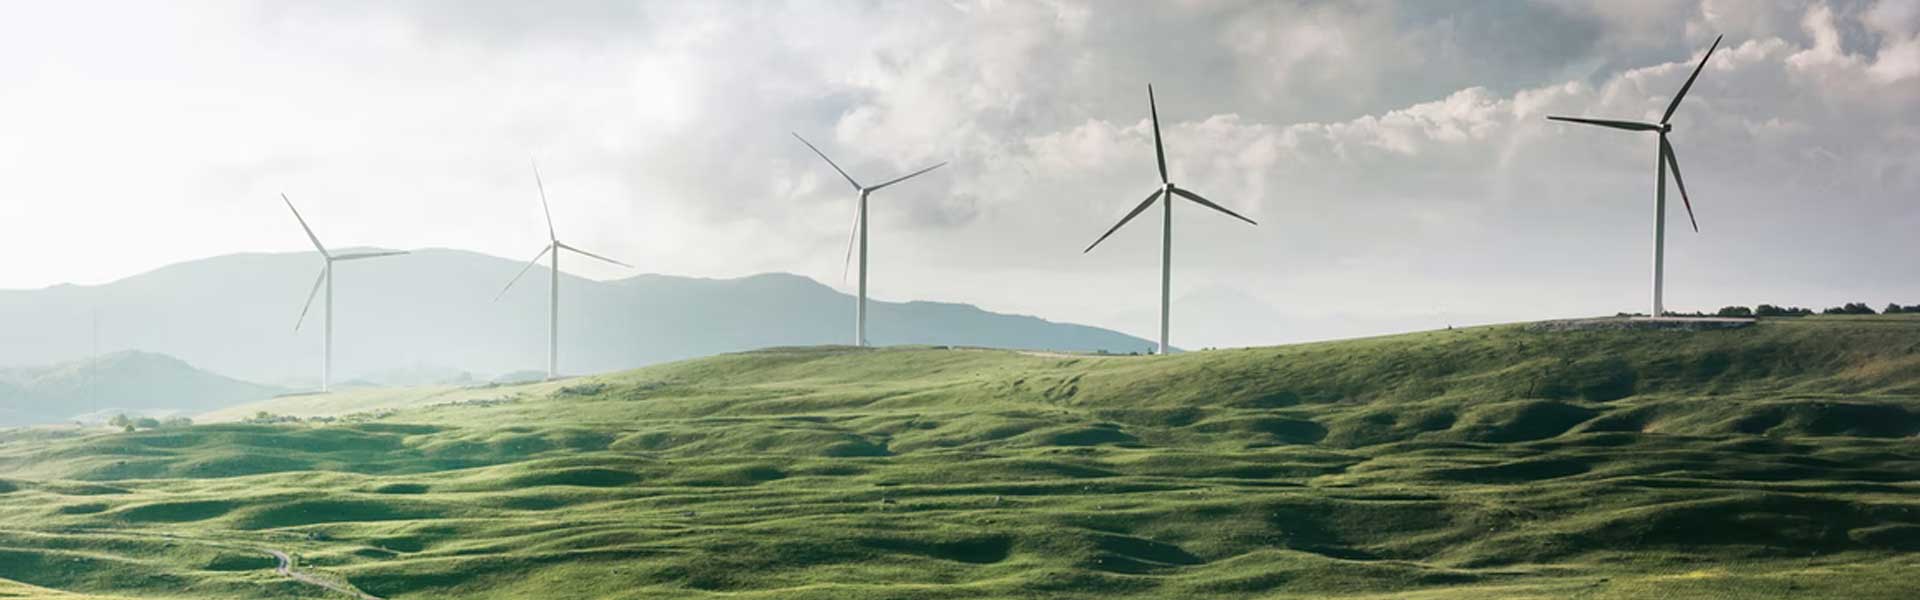 Windmill Farm for Sustainability Reporting Banner